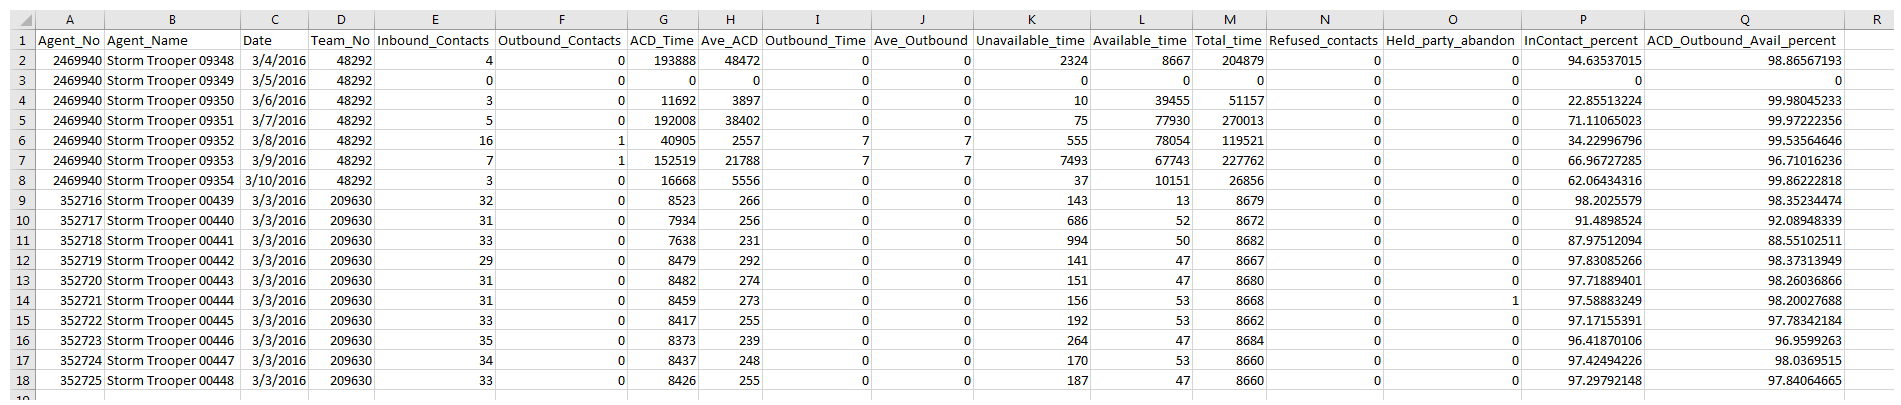 An example of the Agent Summary by Day data download report output.